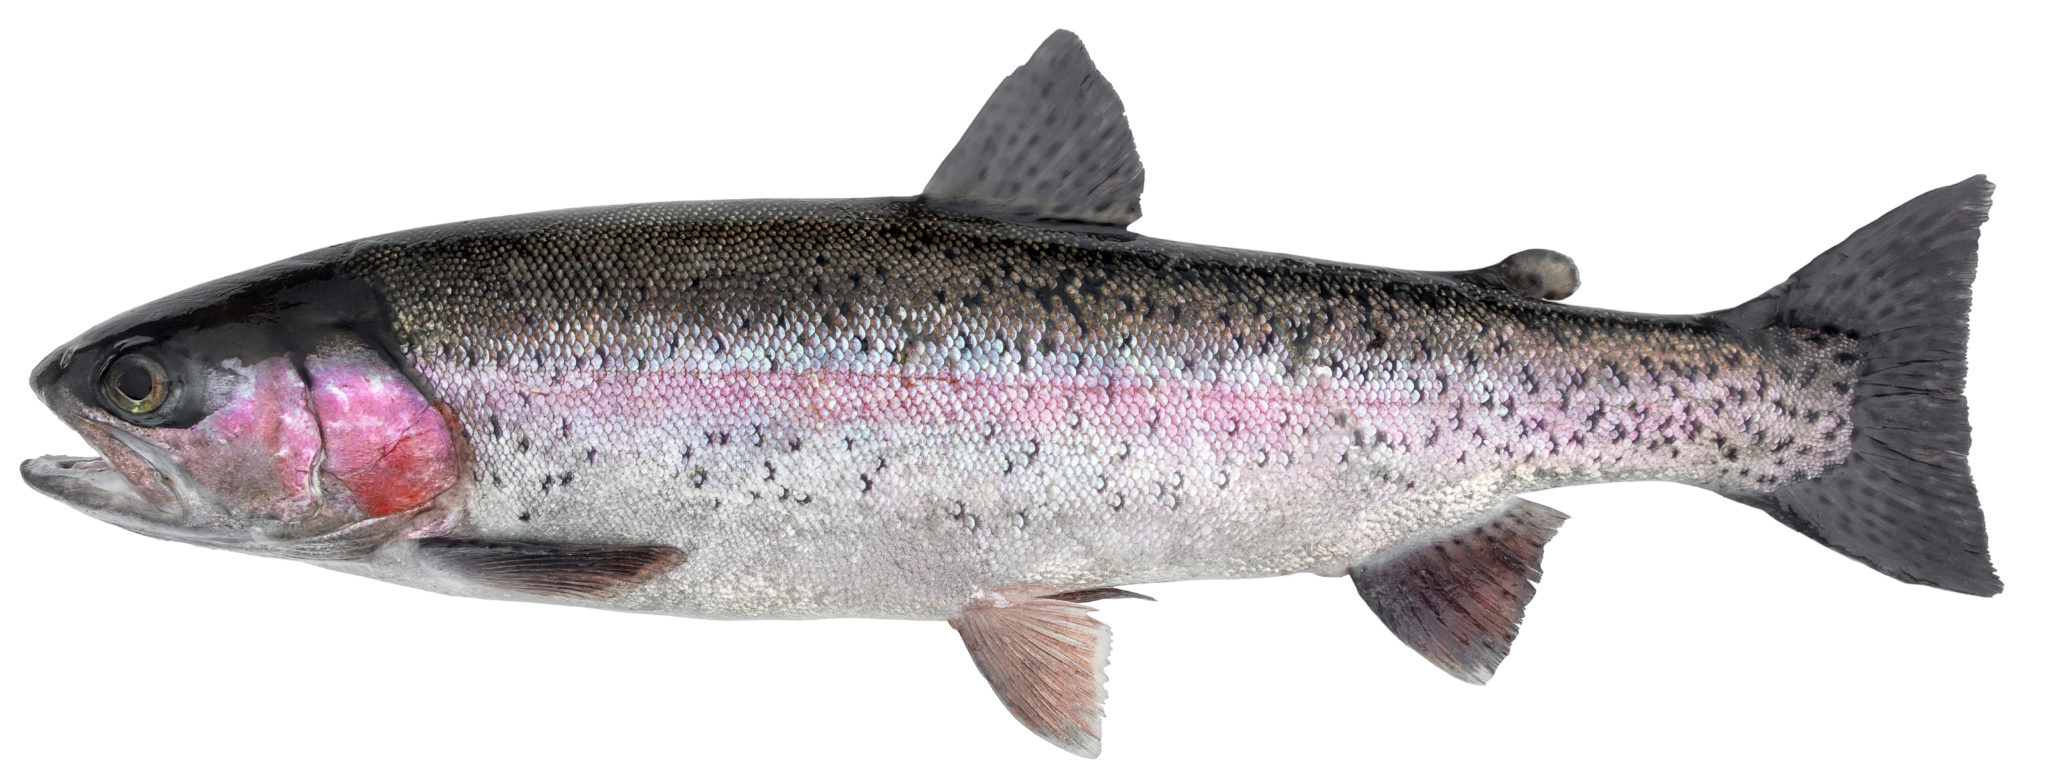 steelhead trout isolated background